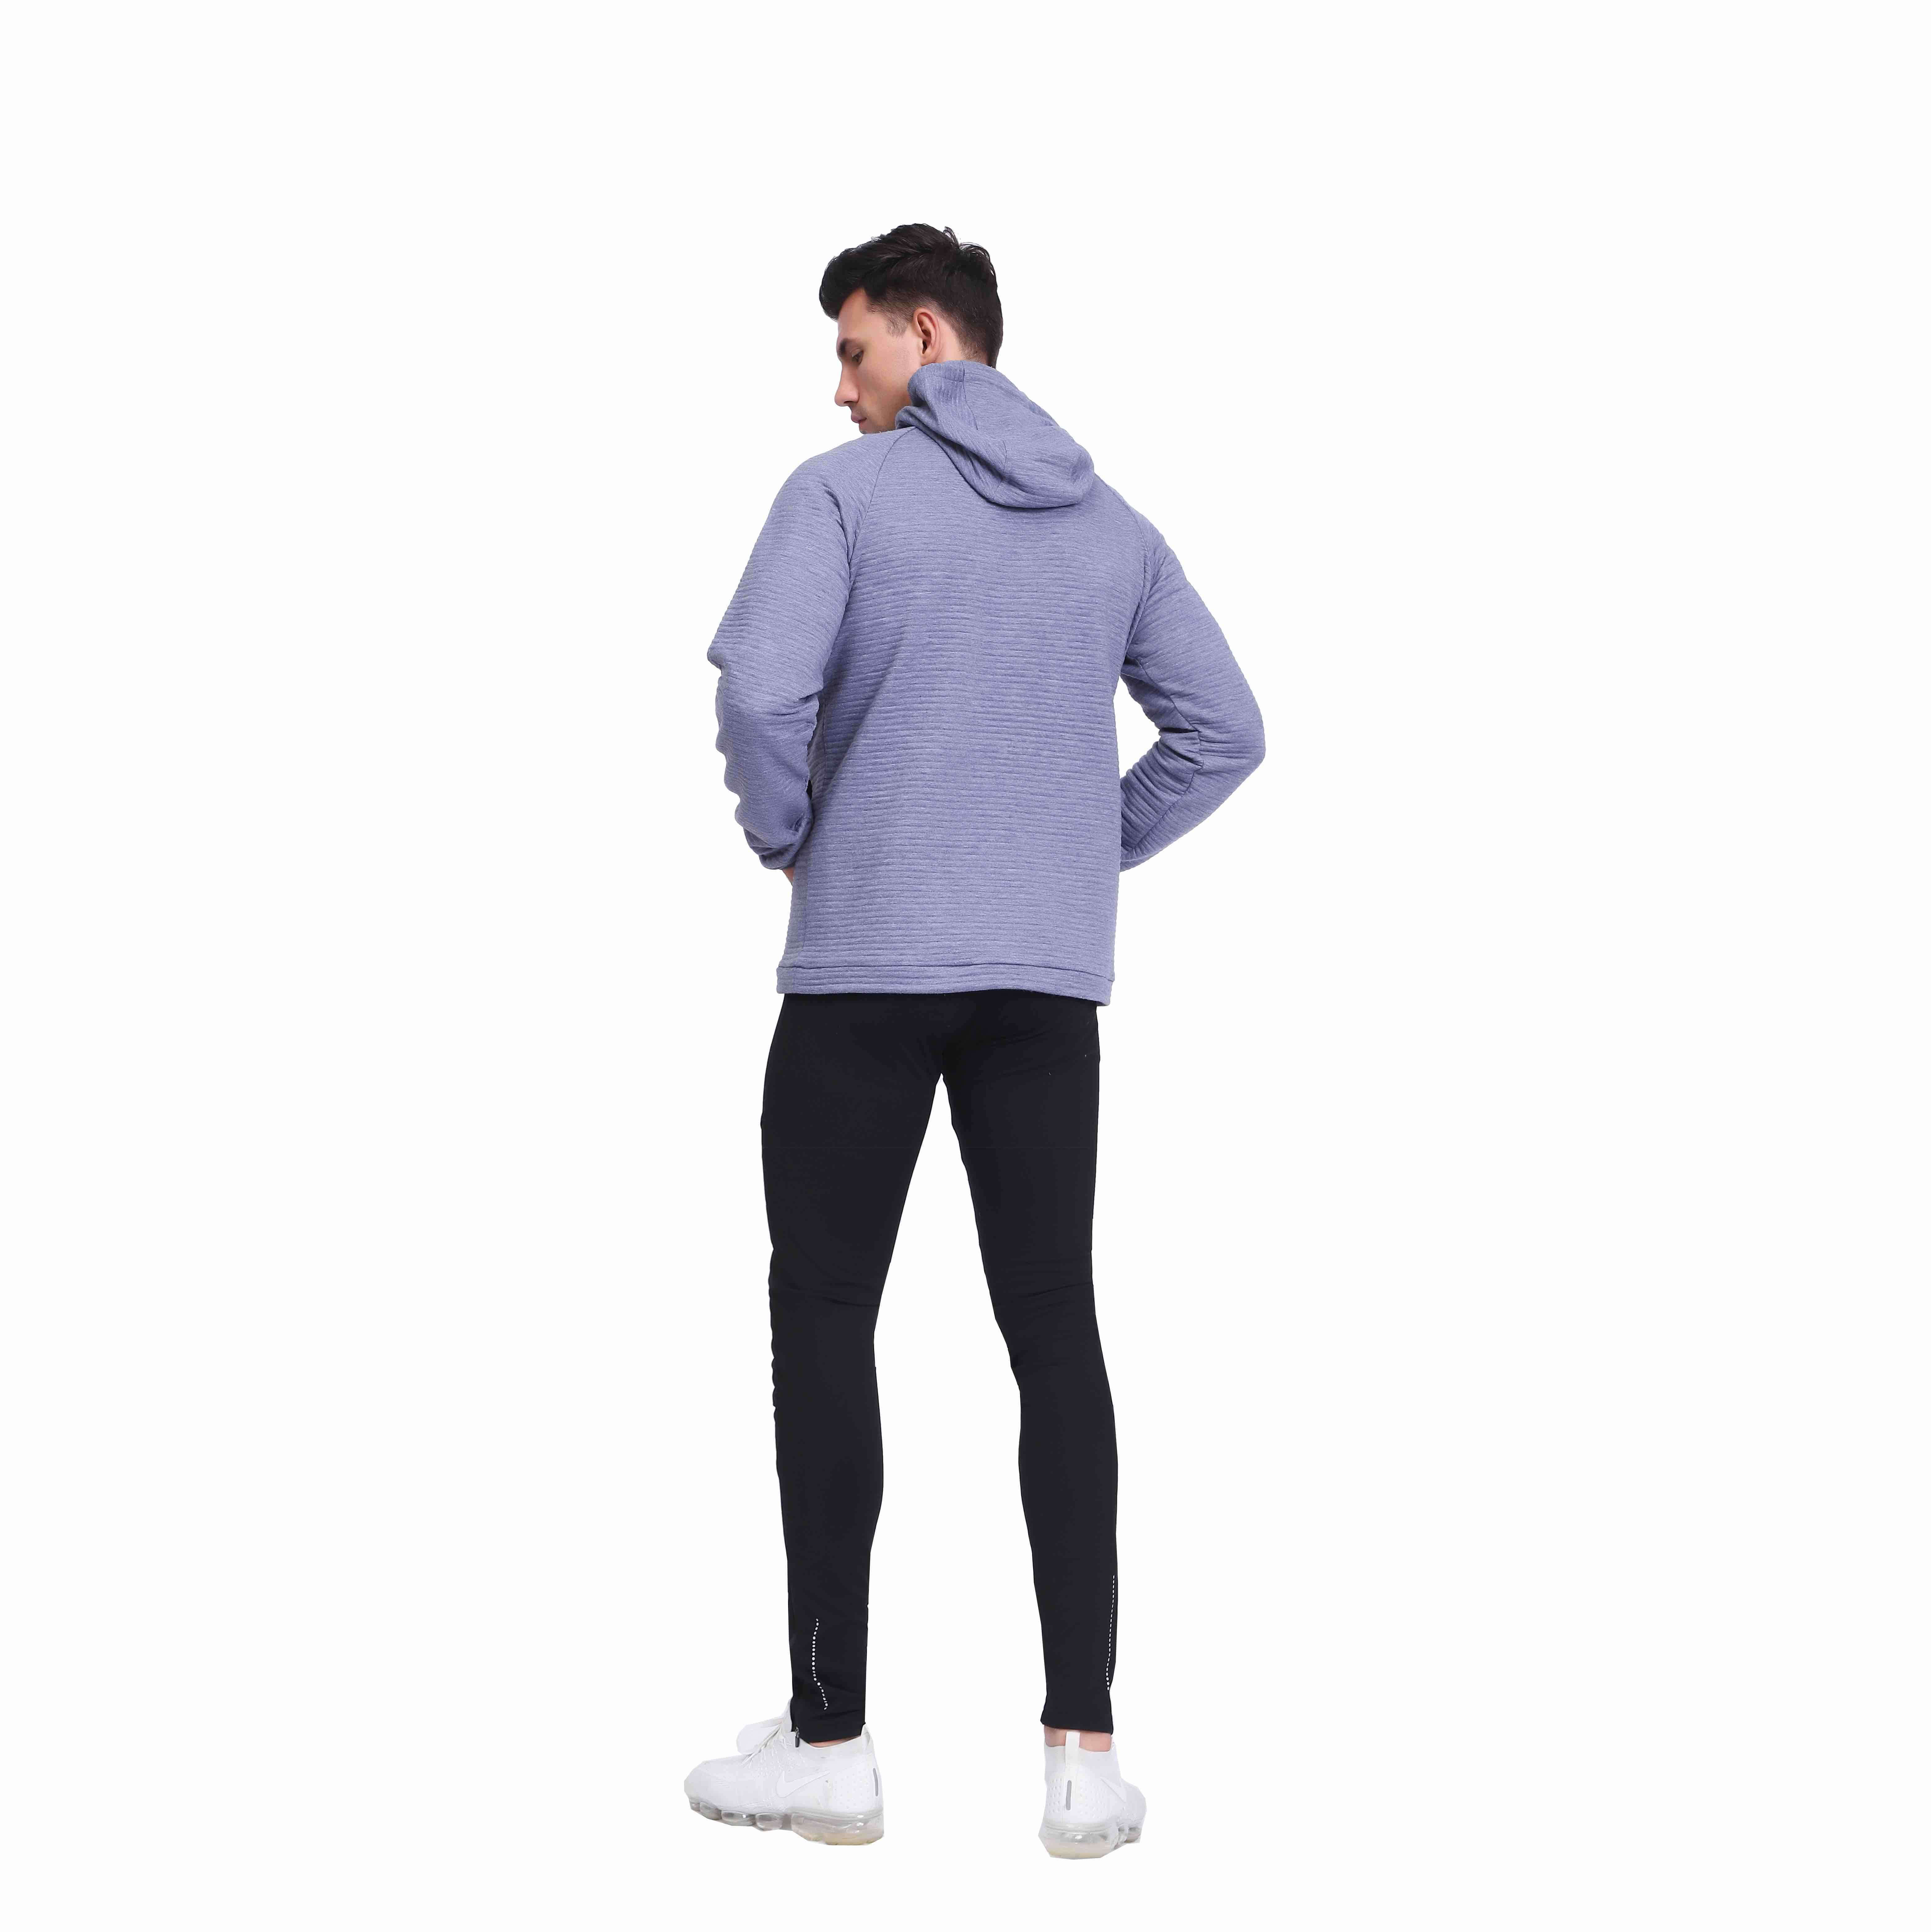 Men's Active Tonal Stripes Half Zipper Pullover Hoodie from China 